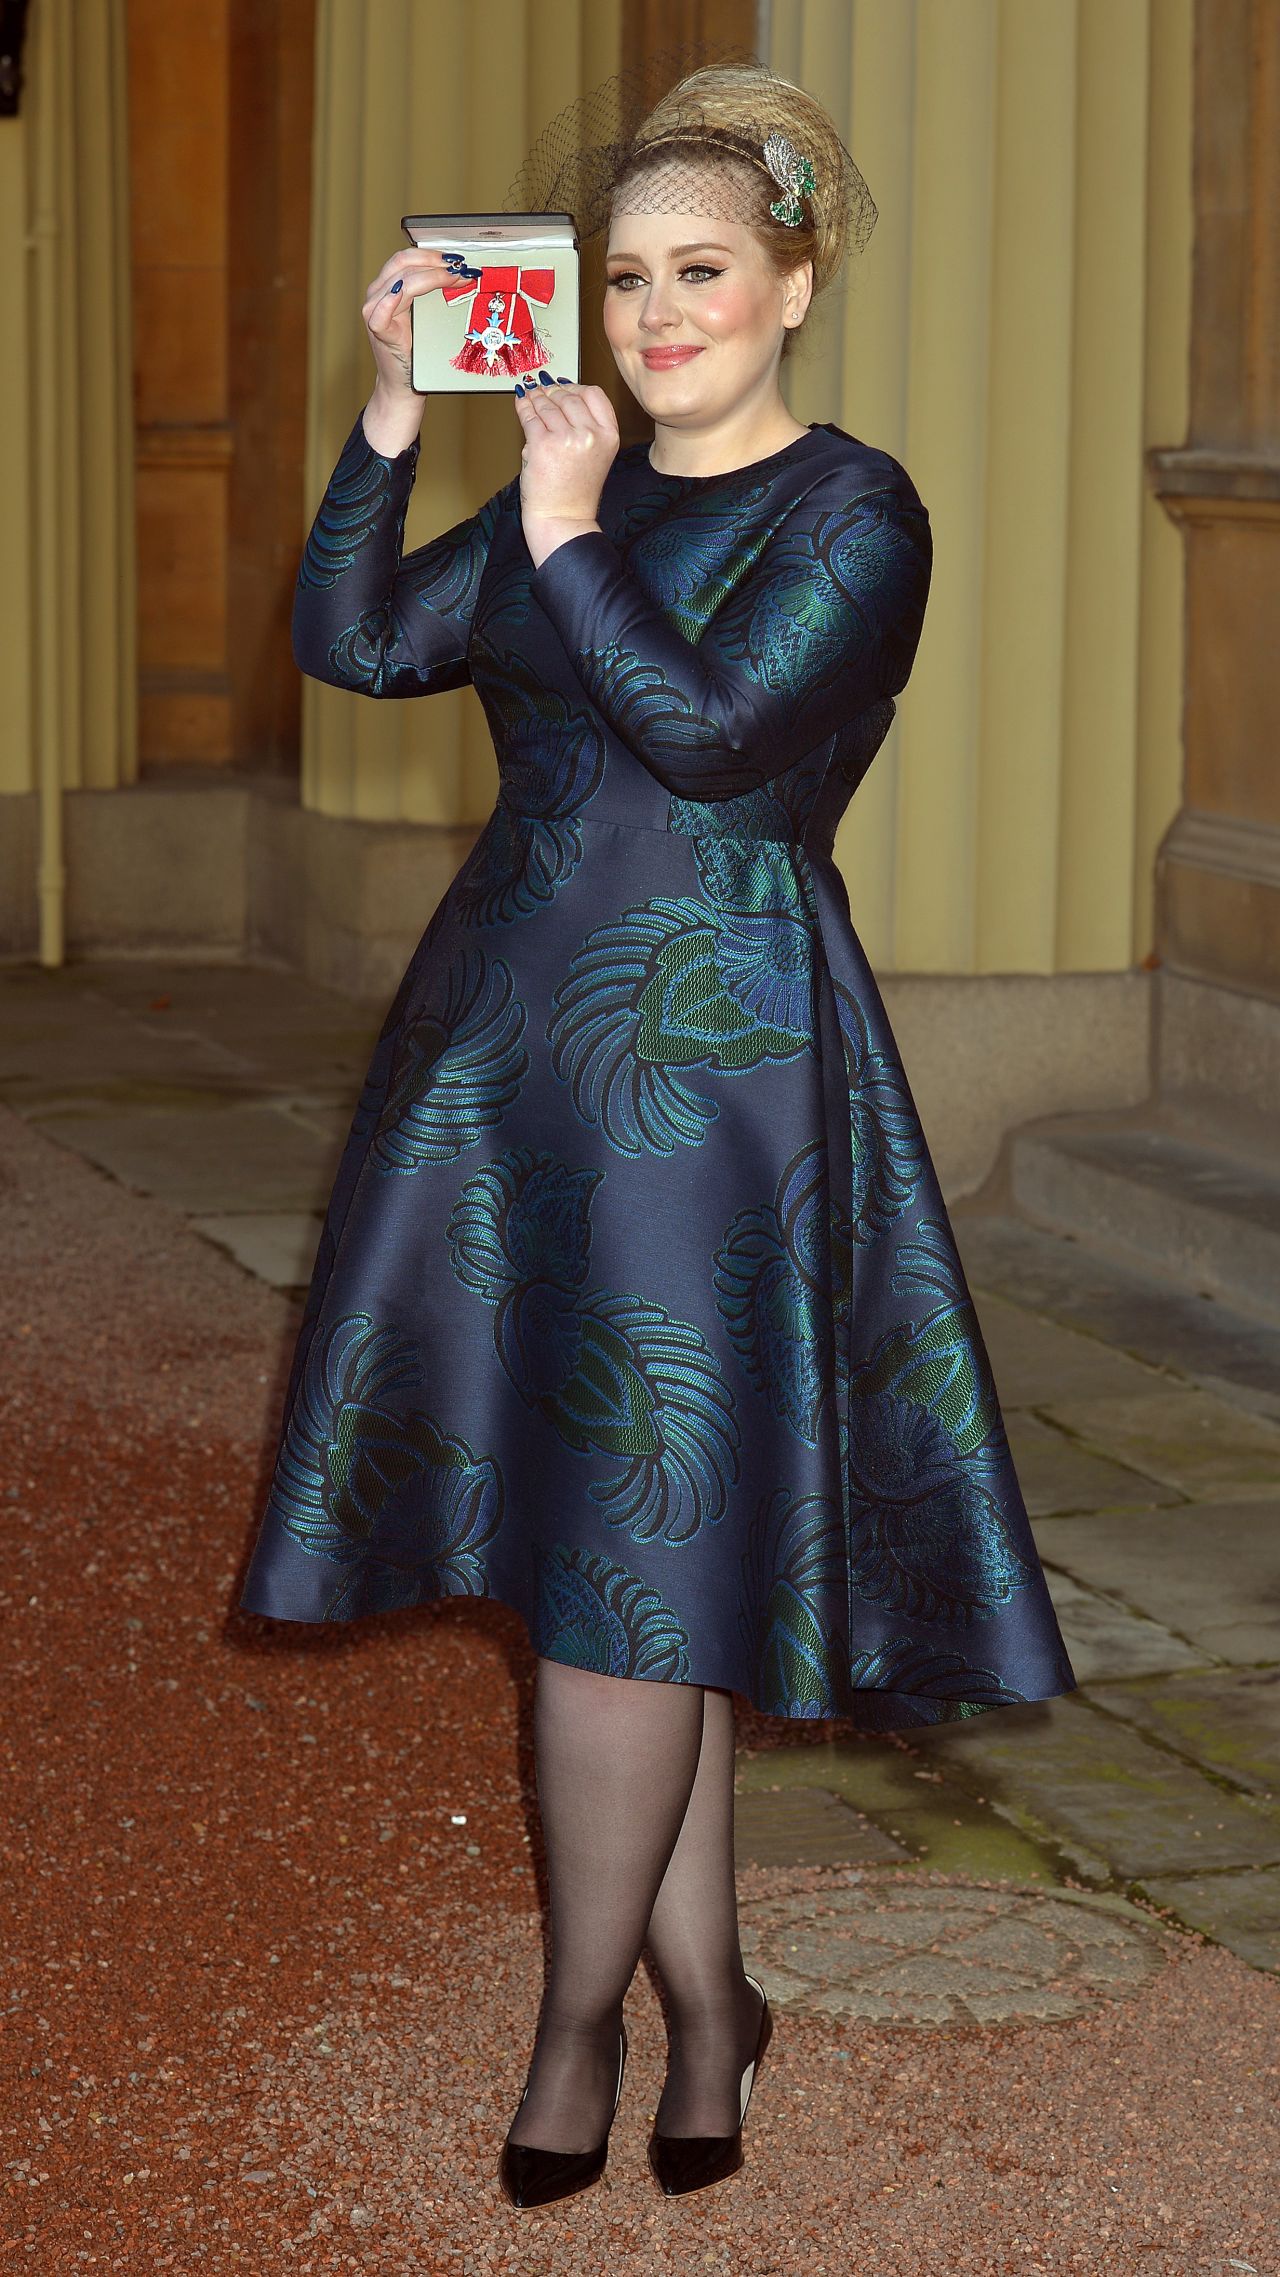 Adele receives the MBE Award for services to music on December 19.